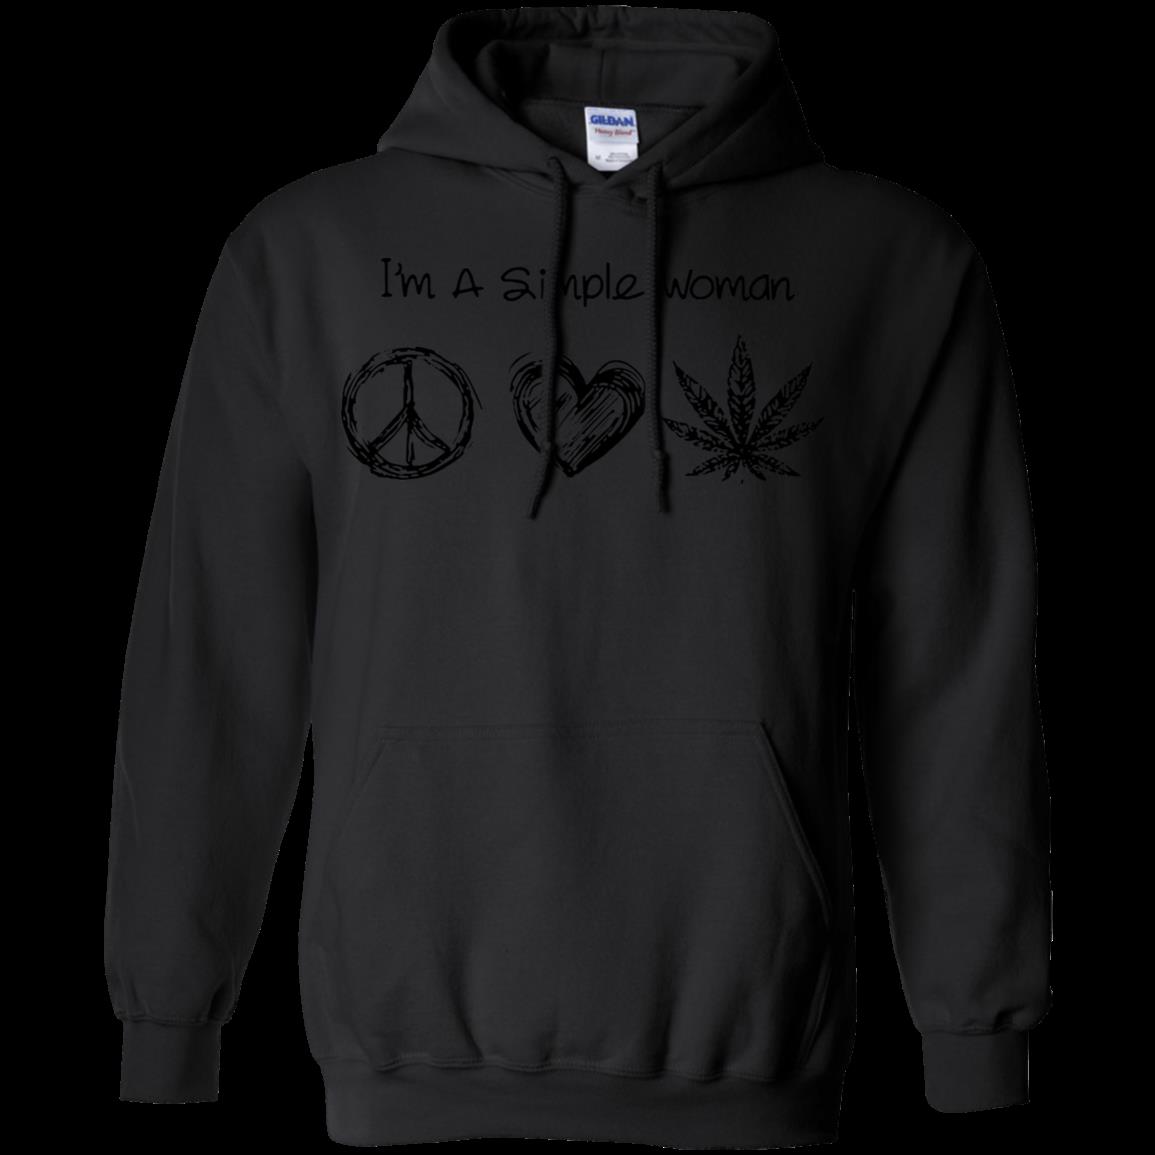 I’m Simple Woman Love Hippie, Heart And Weed Shirt Hoodie